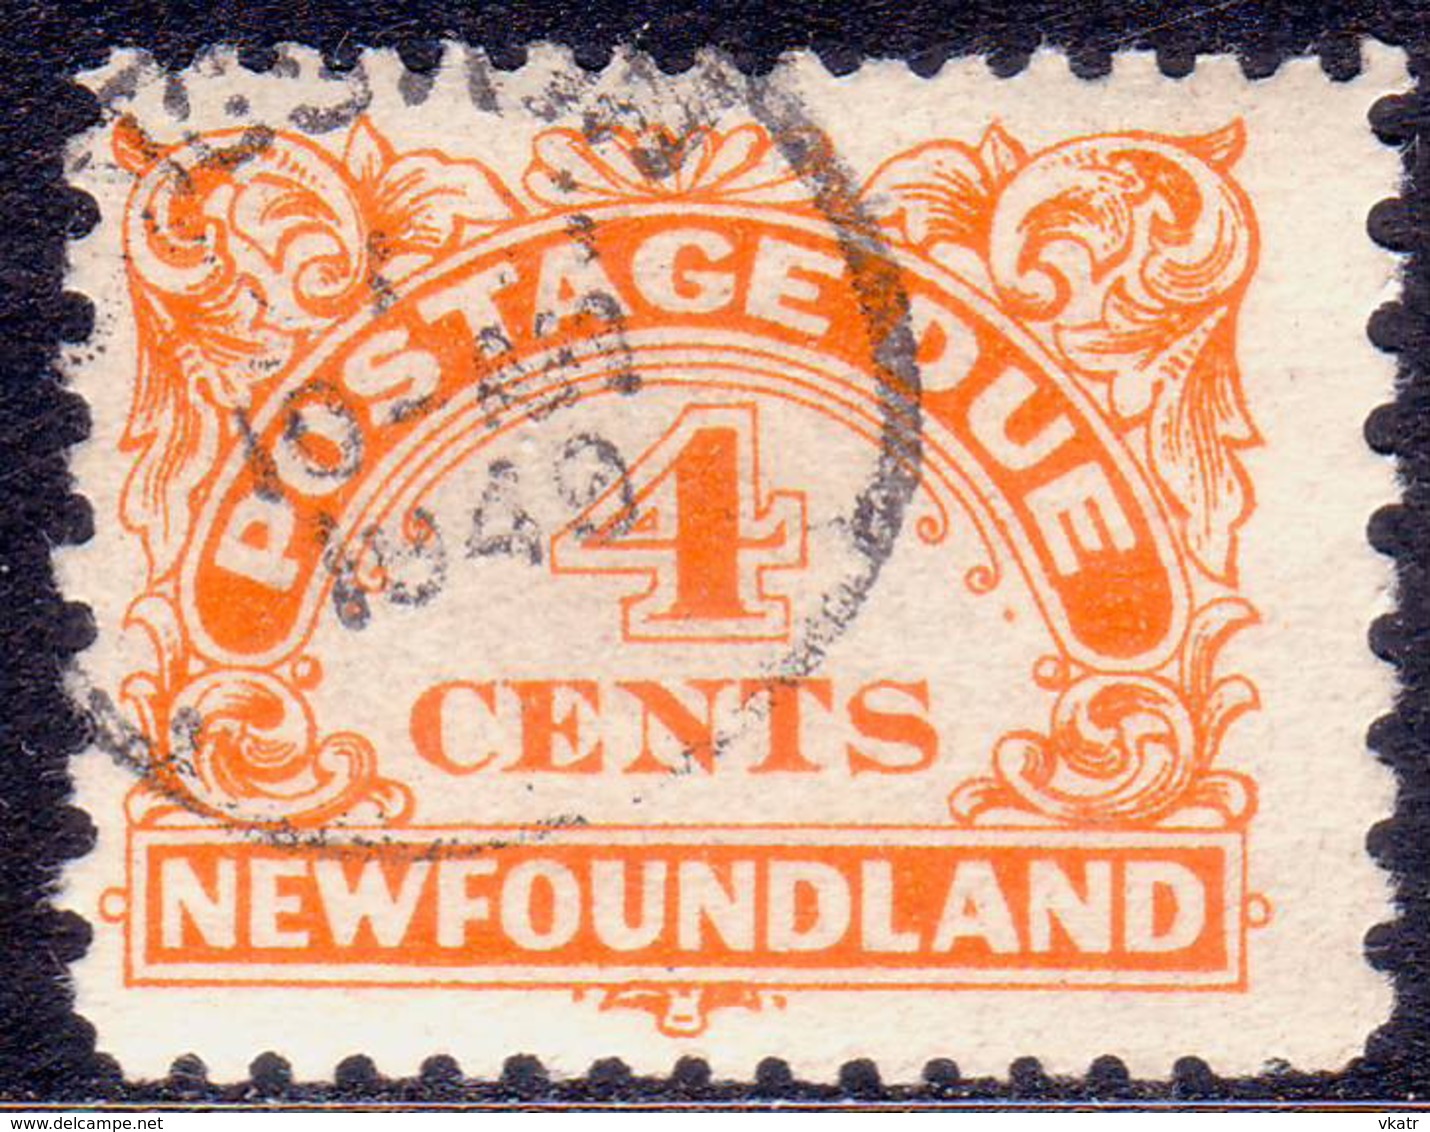 1948 NEWFOUNDLAND SG #D4a 4c Postage Due Used CV £70.00 Perf.11x9 - Back Of Book